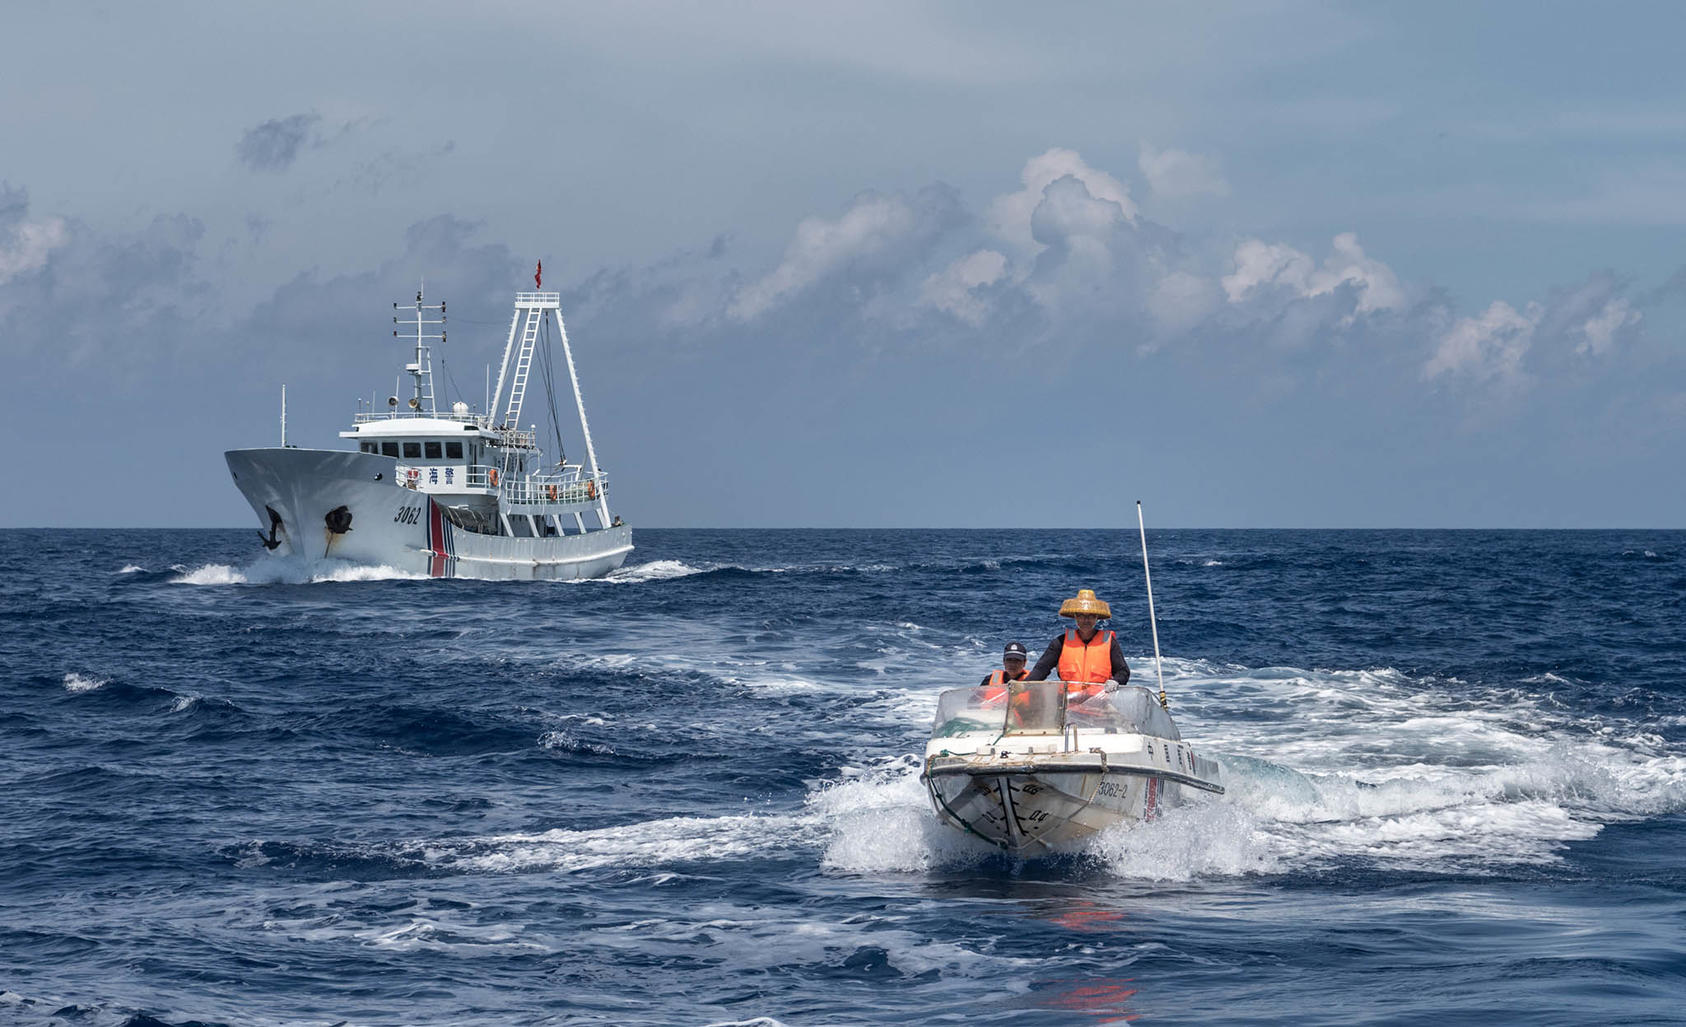 A speedboat launched from a Chinese Coast Guard vessel, in the background, orders the Motoryacht Isla to leave the Scarborough Shoal in the South China Sea. June 18, 2016. (Sergey Ponomarev/The New York Times)